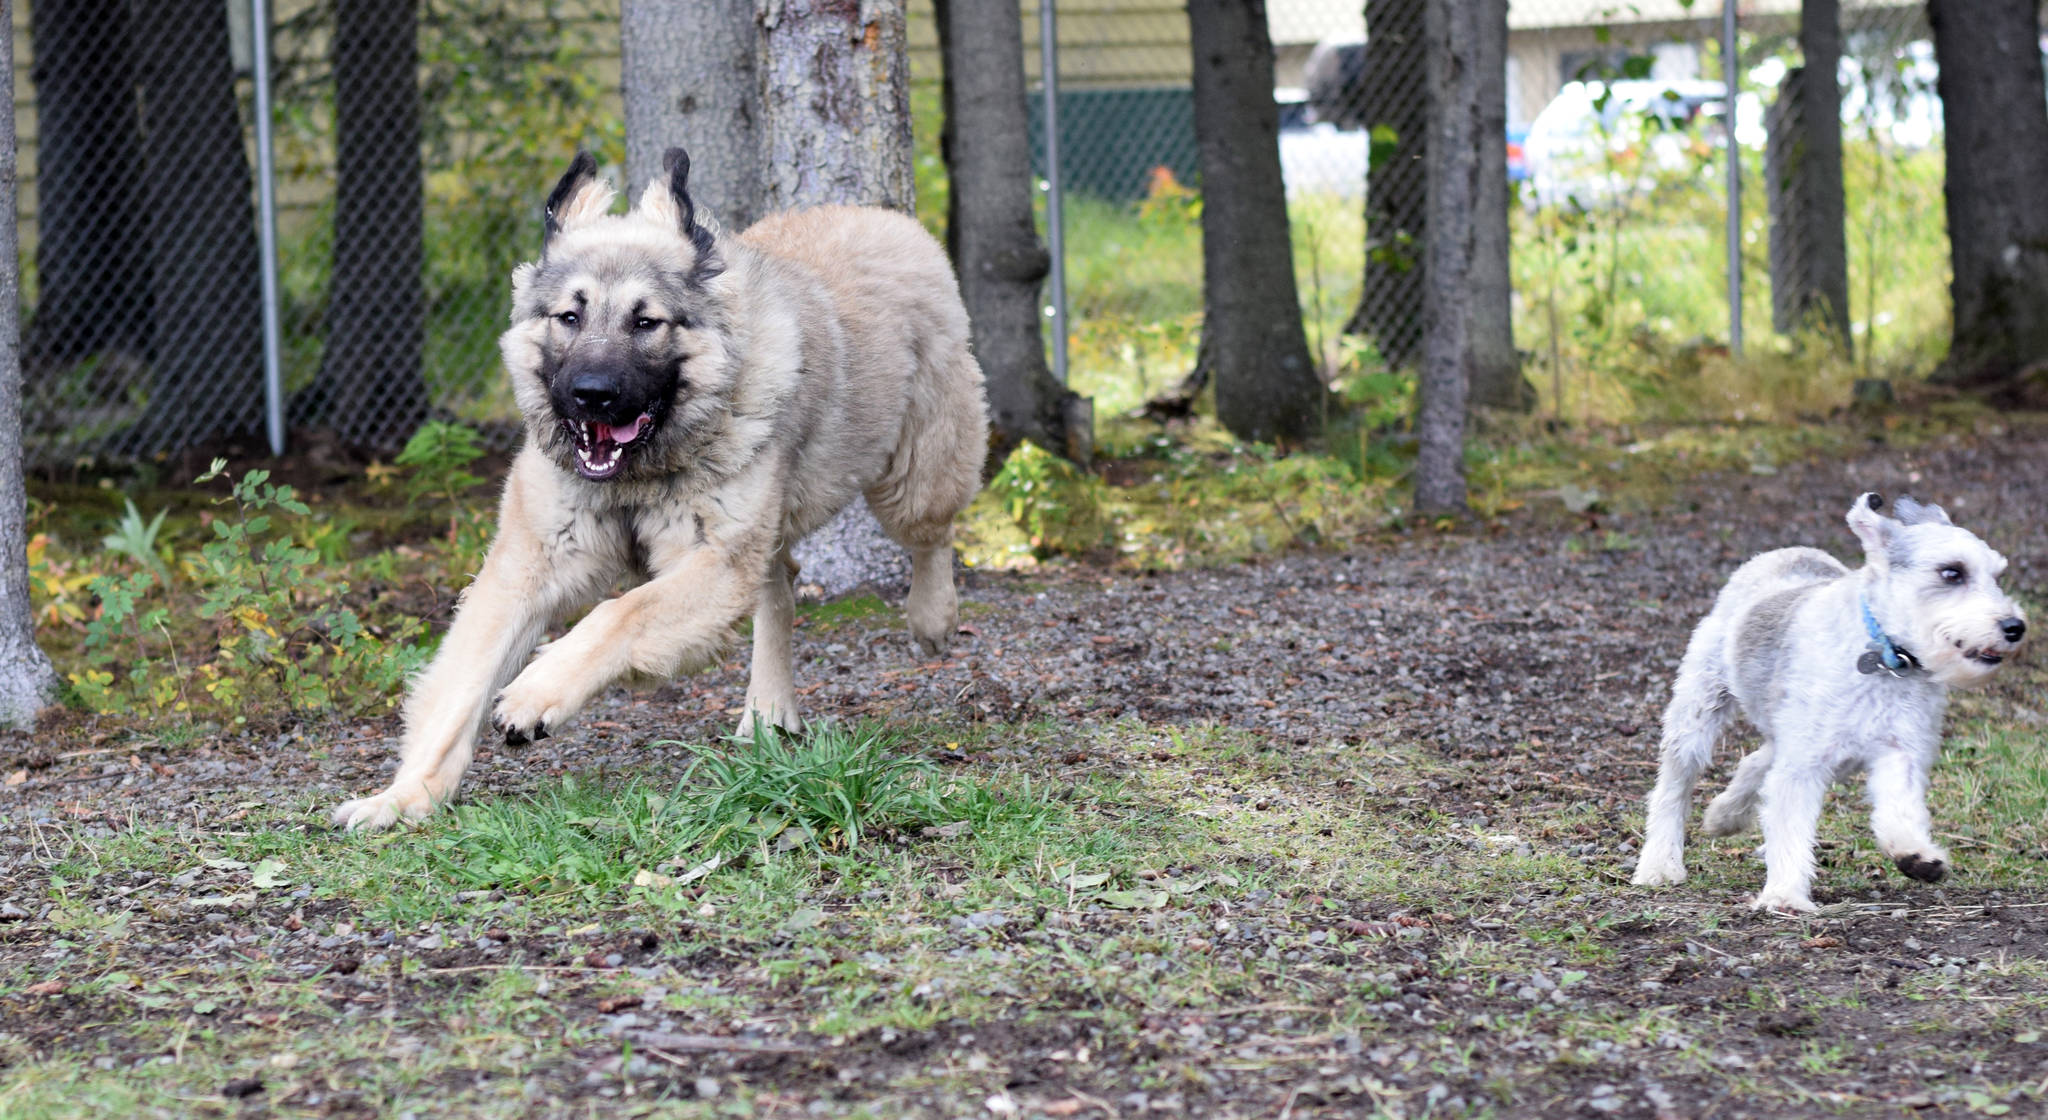 A sarplaninac dog chases after Bear at the Three Friends Dog Park in Soldotna, Alaska on Sunday, September 17, 2017. (Photo by Kat Sorensen/Peninsula Clarion)